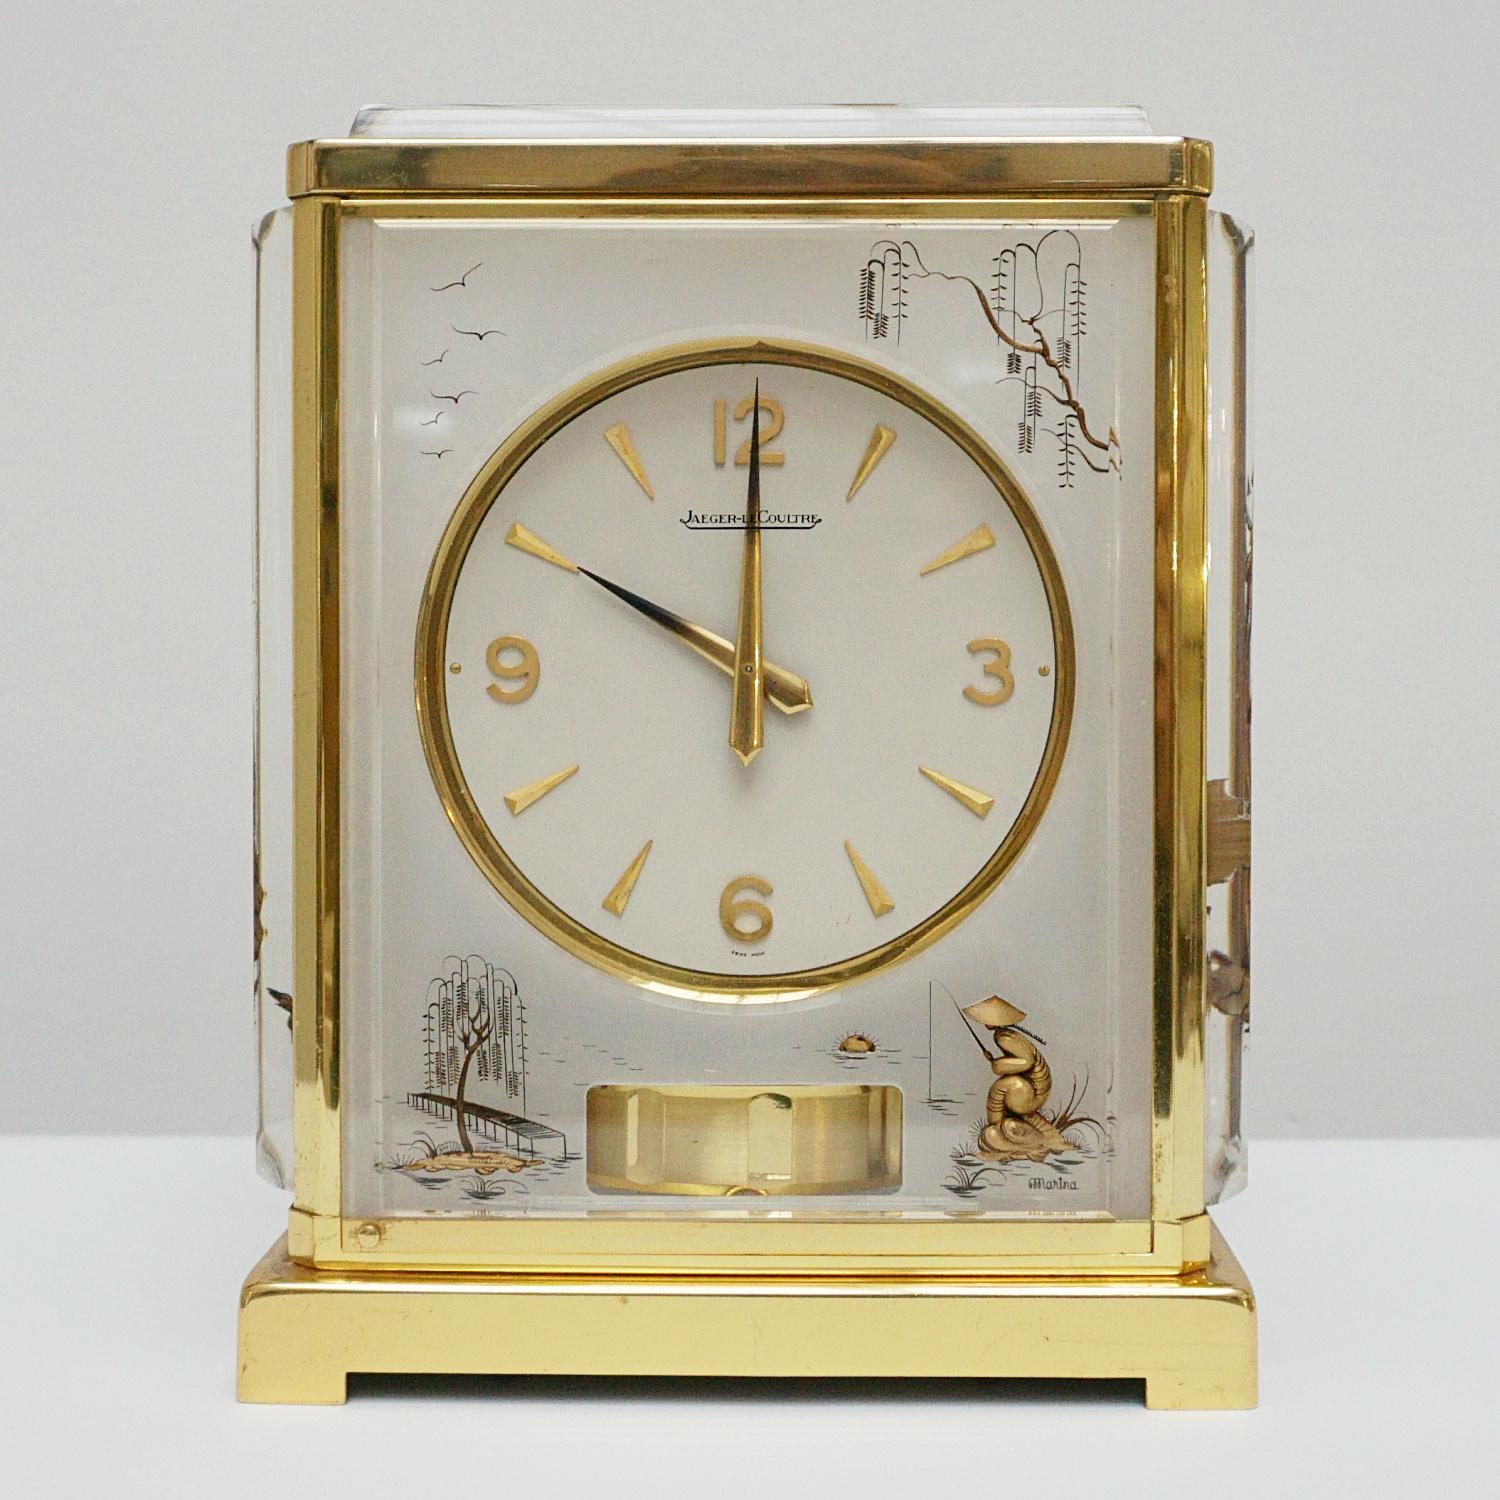 A midcentury marina atmos clock by Jaeger-LeCoultre. Lucite and brass case with inset brass chinoiserie decoration. Eight day movement by Jaeger-LeCoultre with baton numerals and original gilded hands. Marina inset to lower right corner.

Origin: